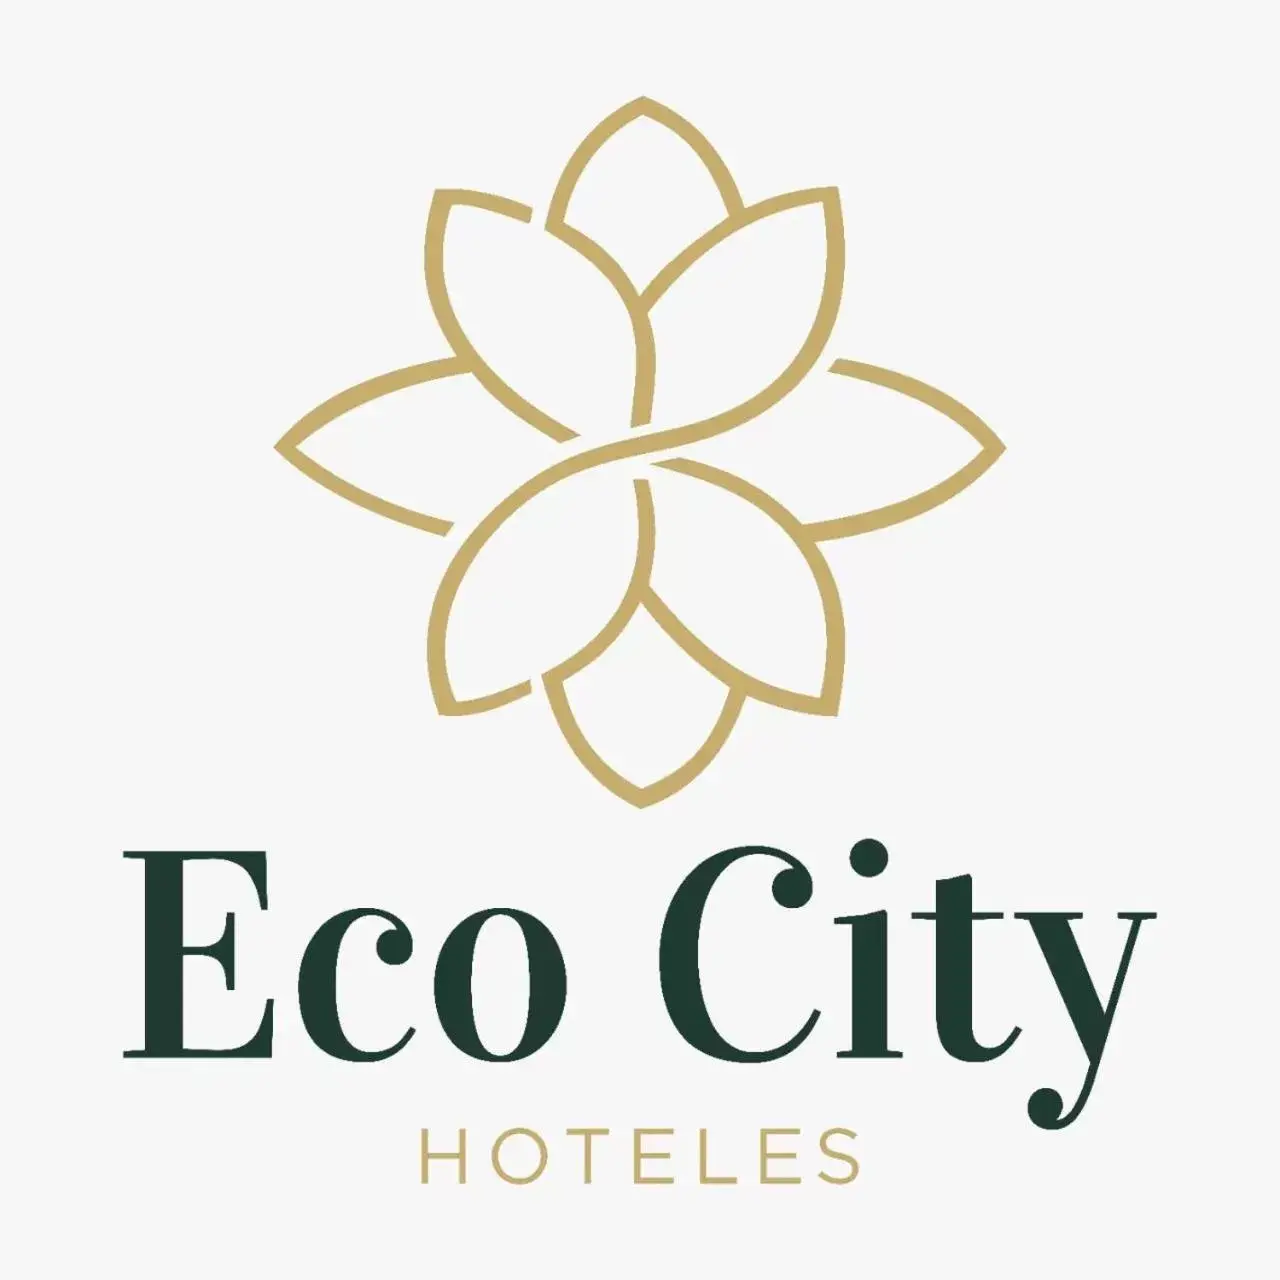 Property Logo/Sign in Eco City Hoteles